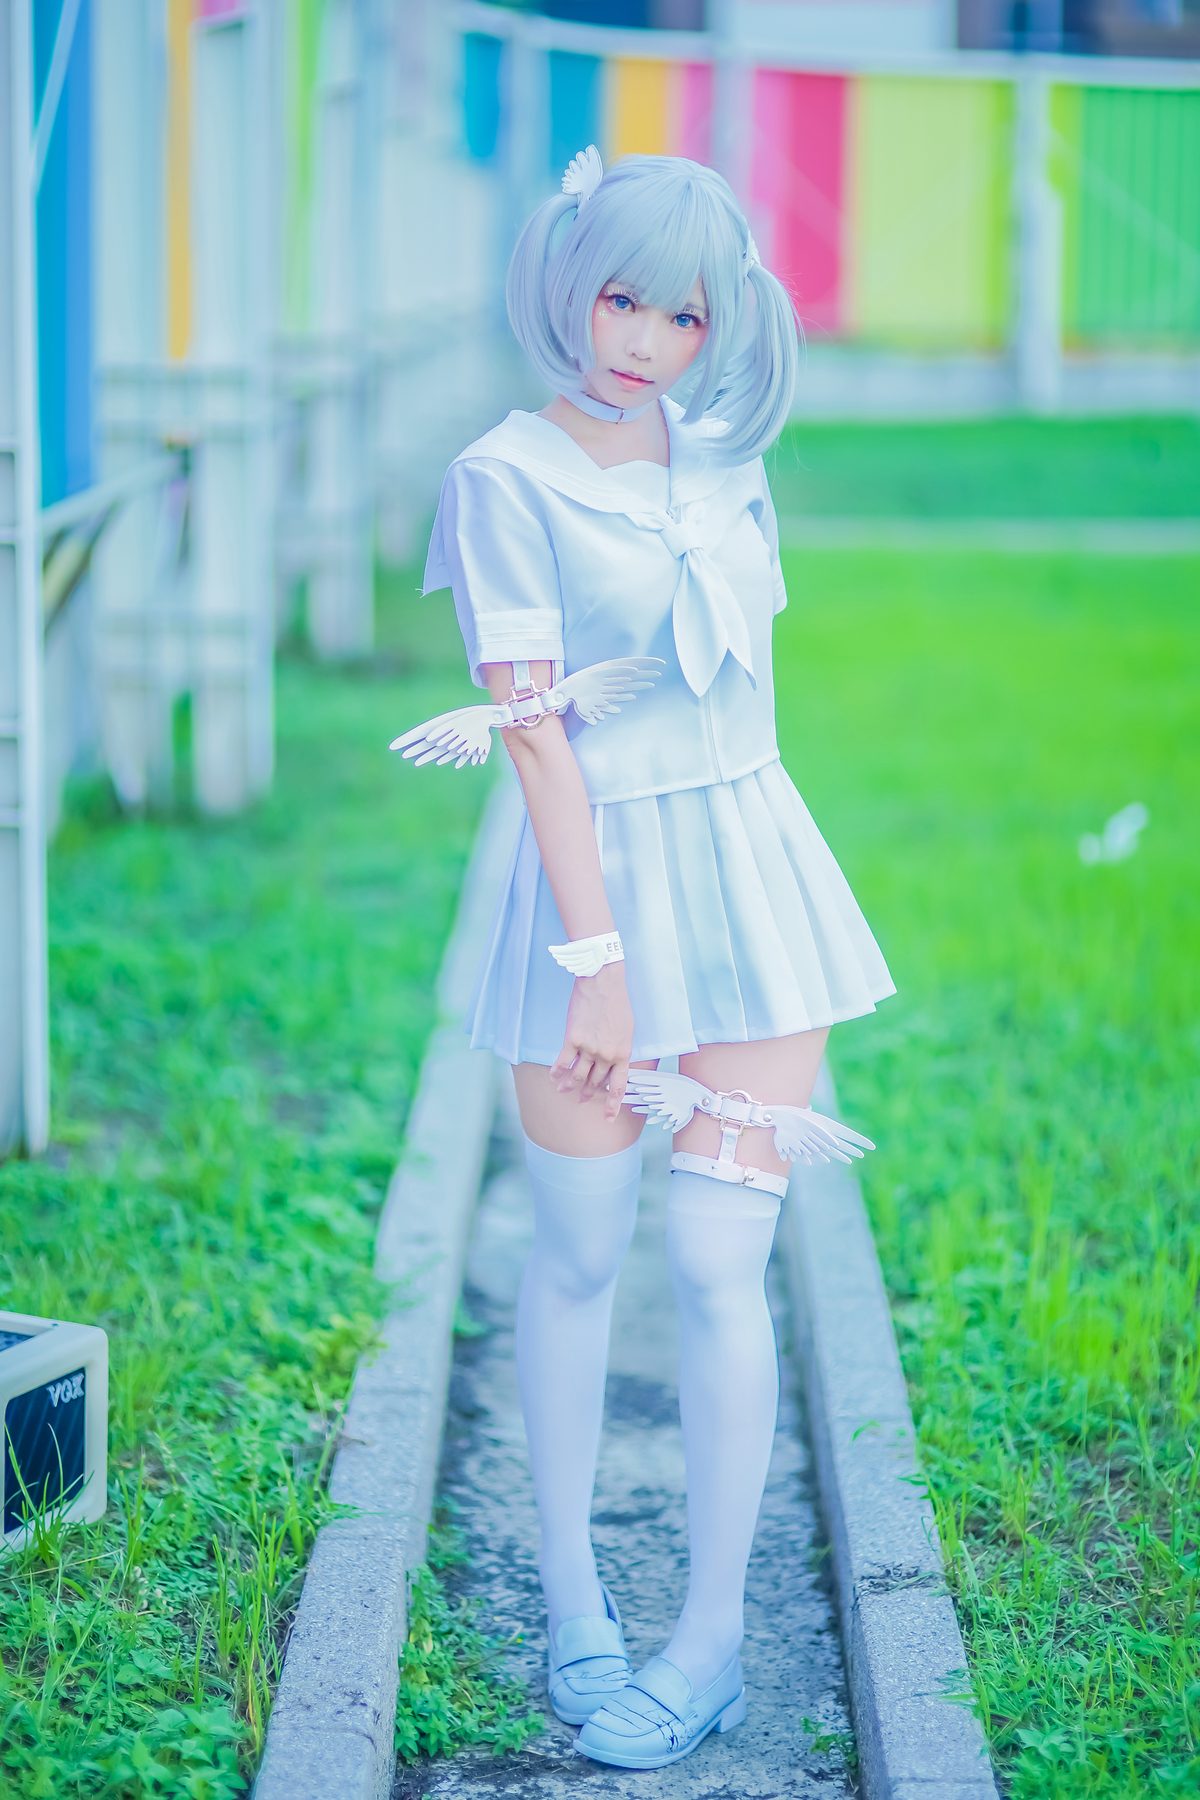 Coser@Ely_eee ElyEE子 TUESDAY TWINTAIL A 0038 8909135276.jpg